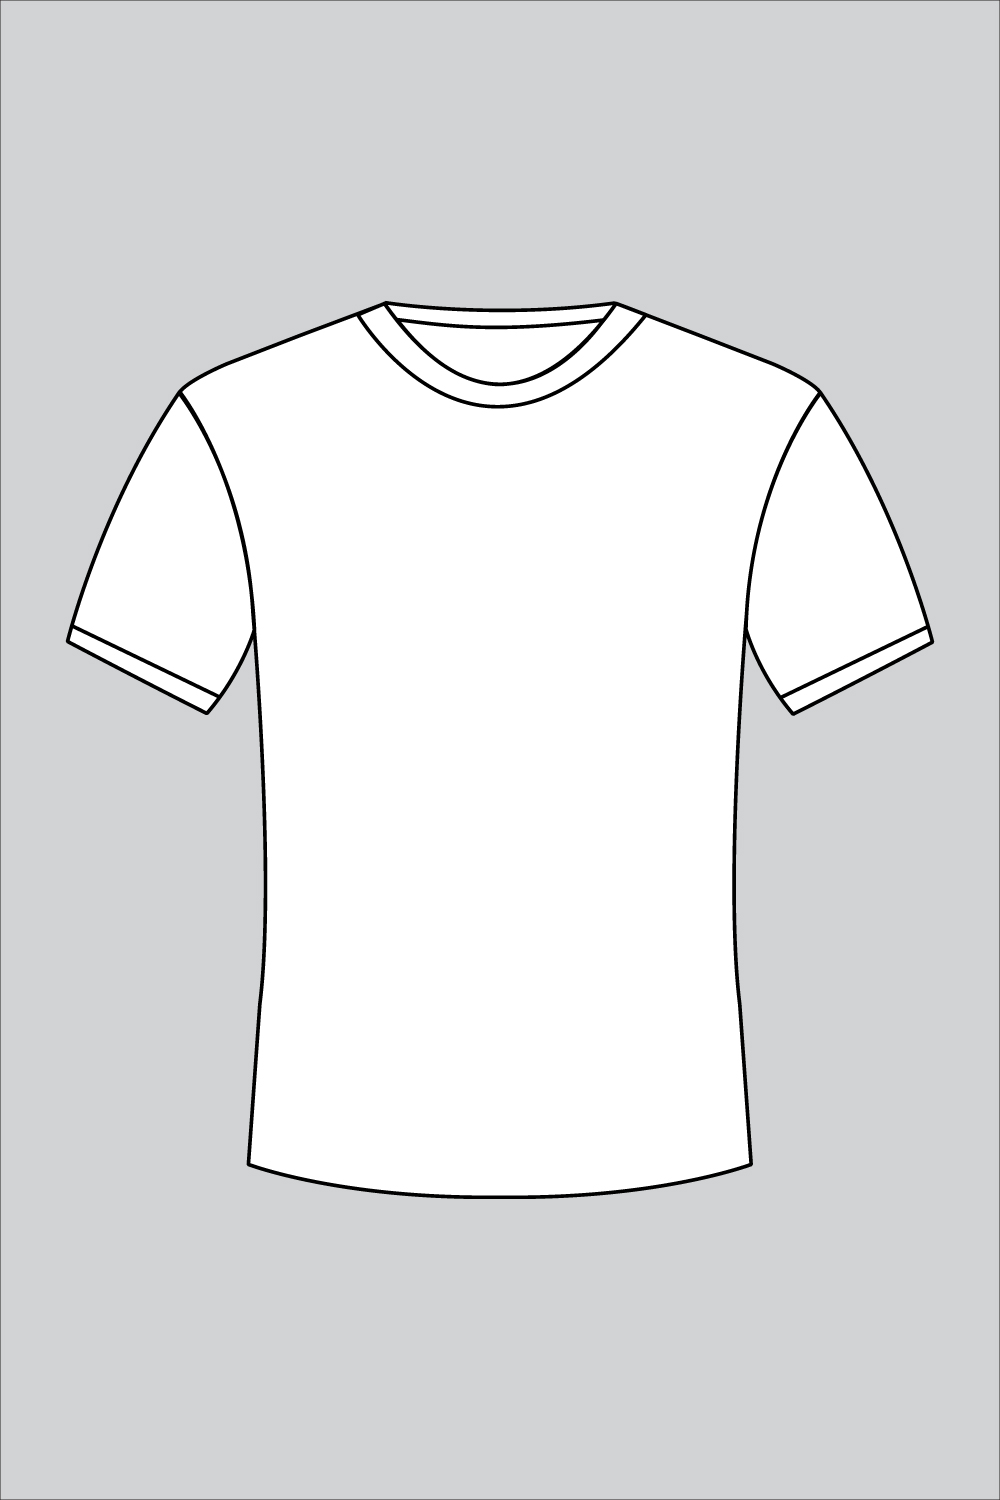 White t shirt template-1 pinterest preview image.